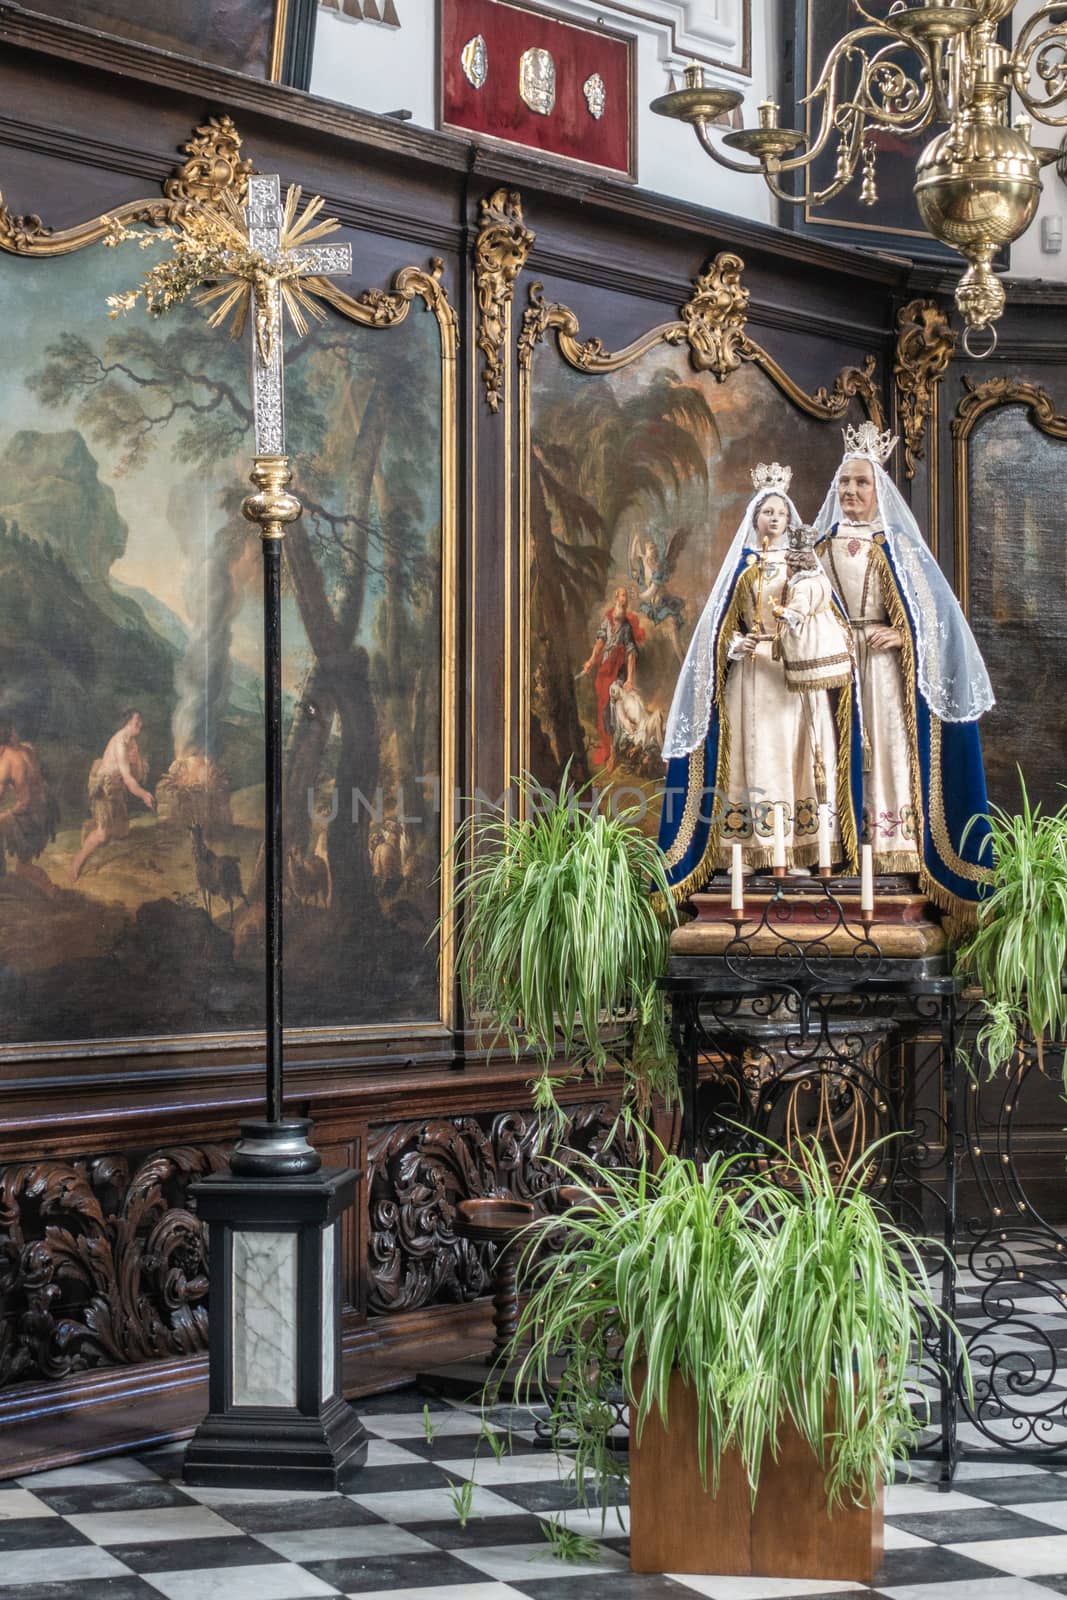 Brugge, Flanders, Belgium - September 19, 2018: Wall covered in paintings with gold decorations behind statue of Saint Anna and the Madonna in Saint Anna Church in Bruges. Some green plants up front.